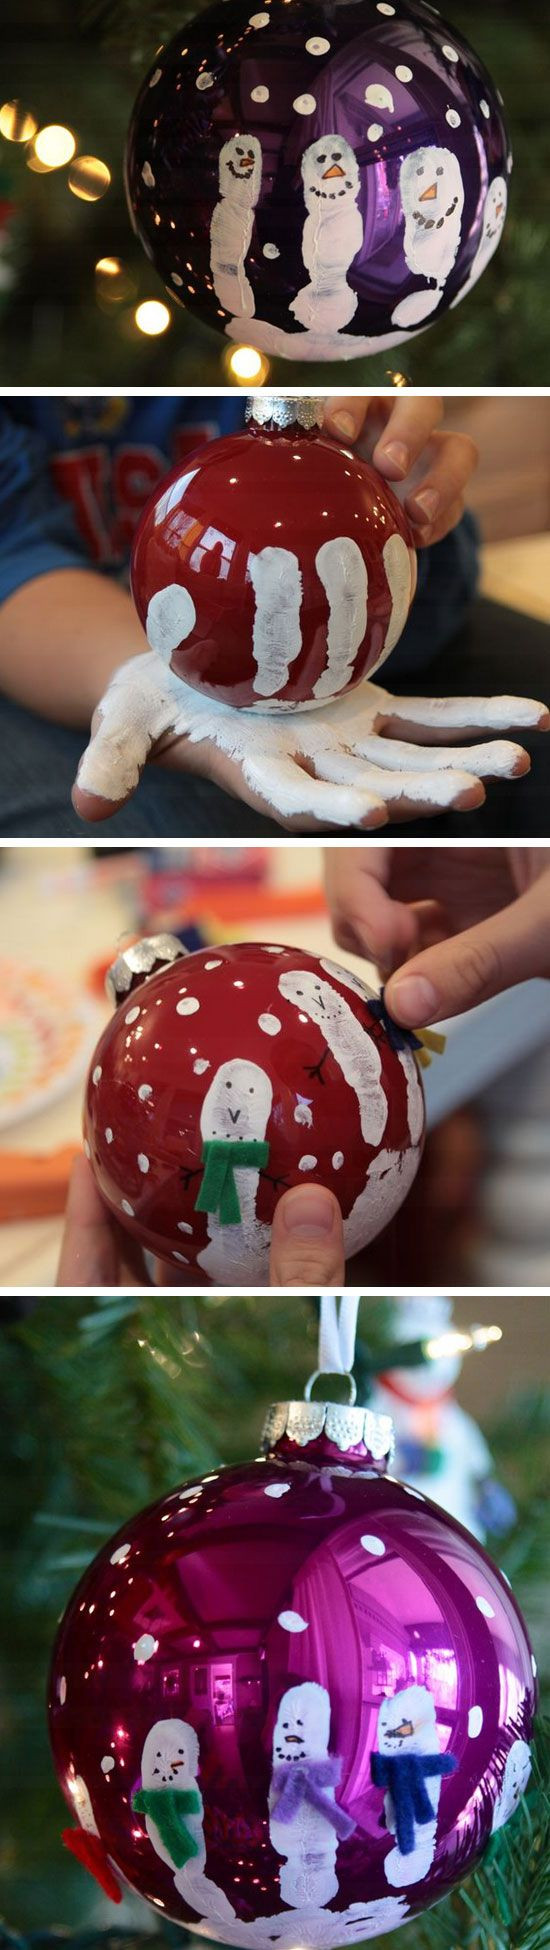 Homemade Crafts For Toddlers
 Easy and Cute DIY Christmas Crafts for Kids to Make Hative